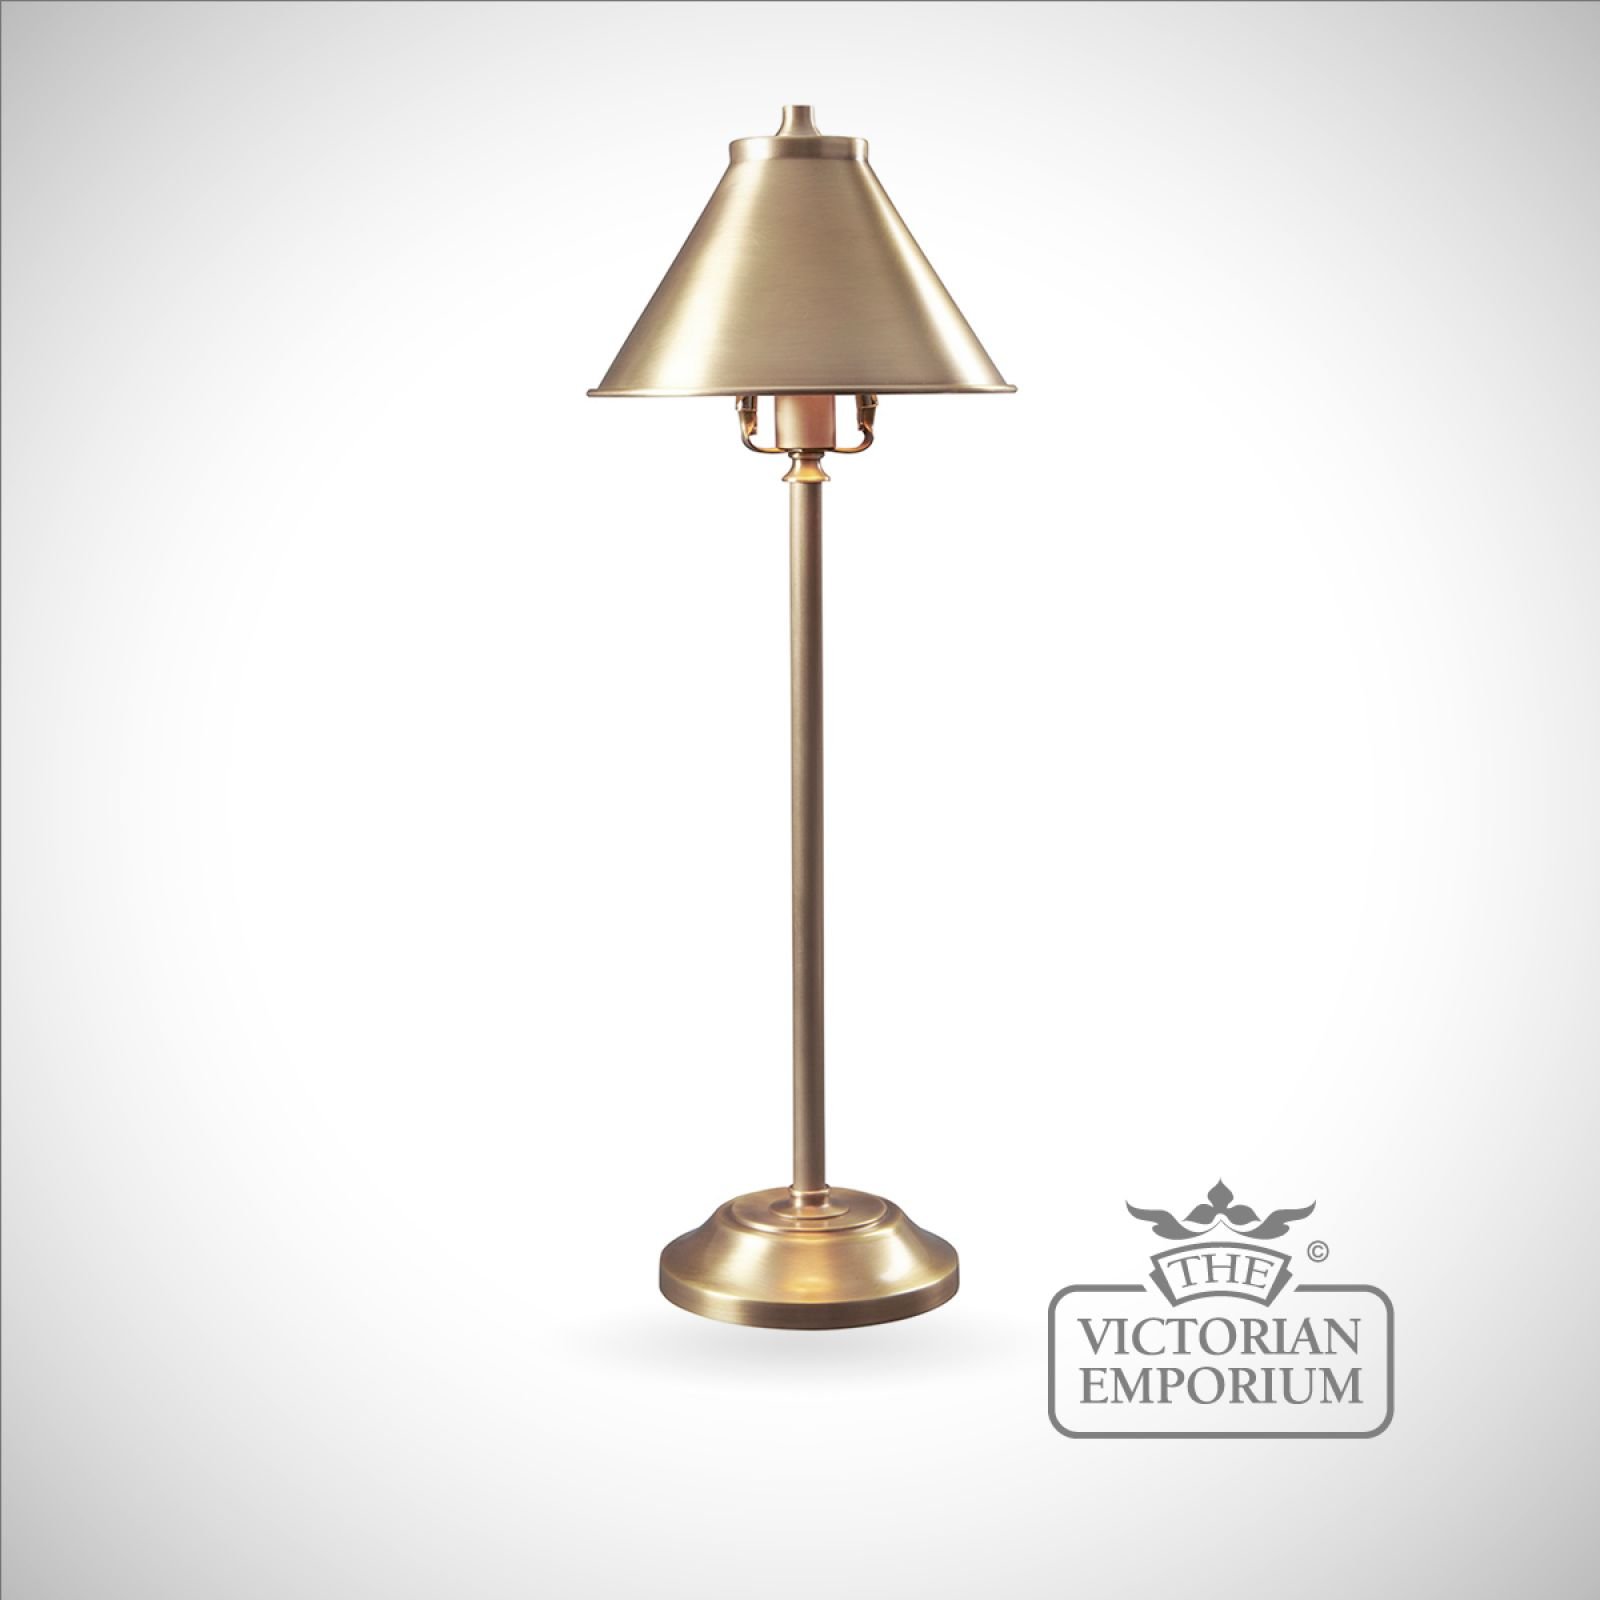 Provence stick lamp in Aged Brass